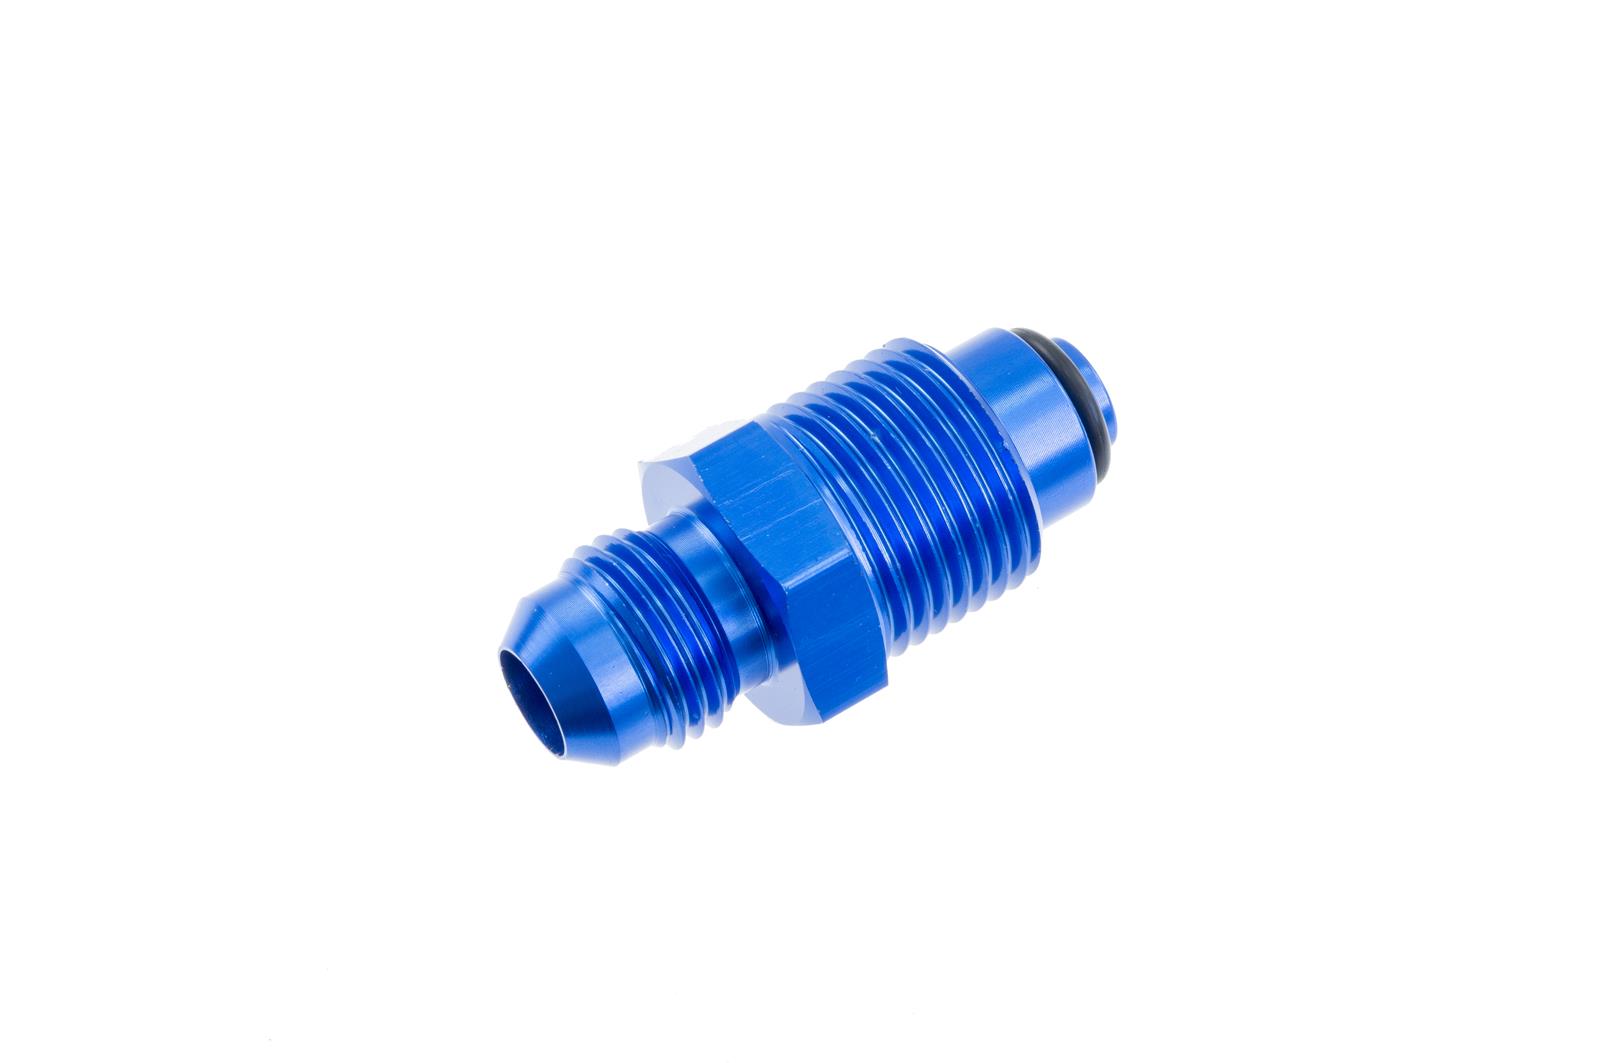 Redhorse Performance 8163-06-16-1 -06 AN Male to M16x1.5 o-ring, aluminum, blue